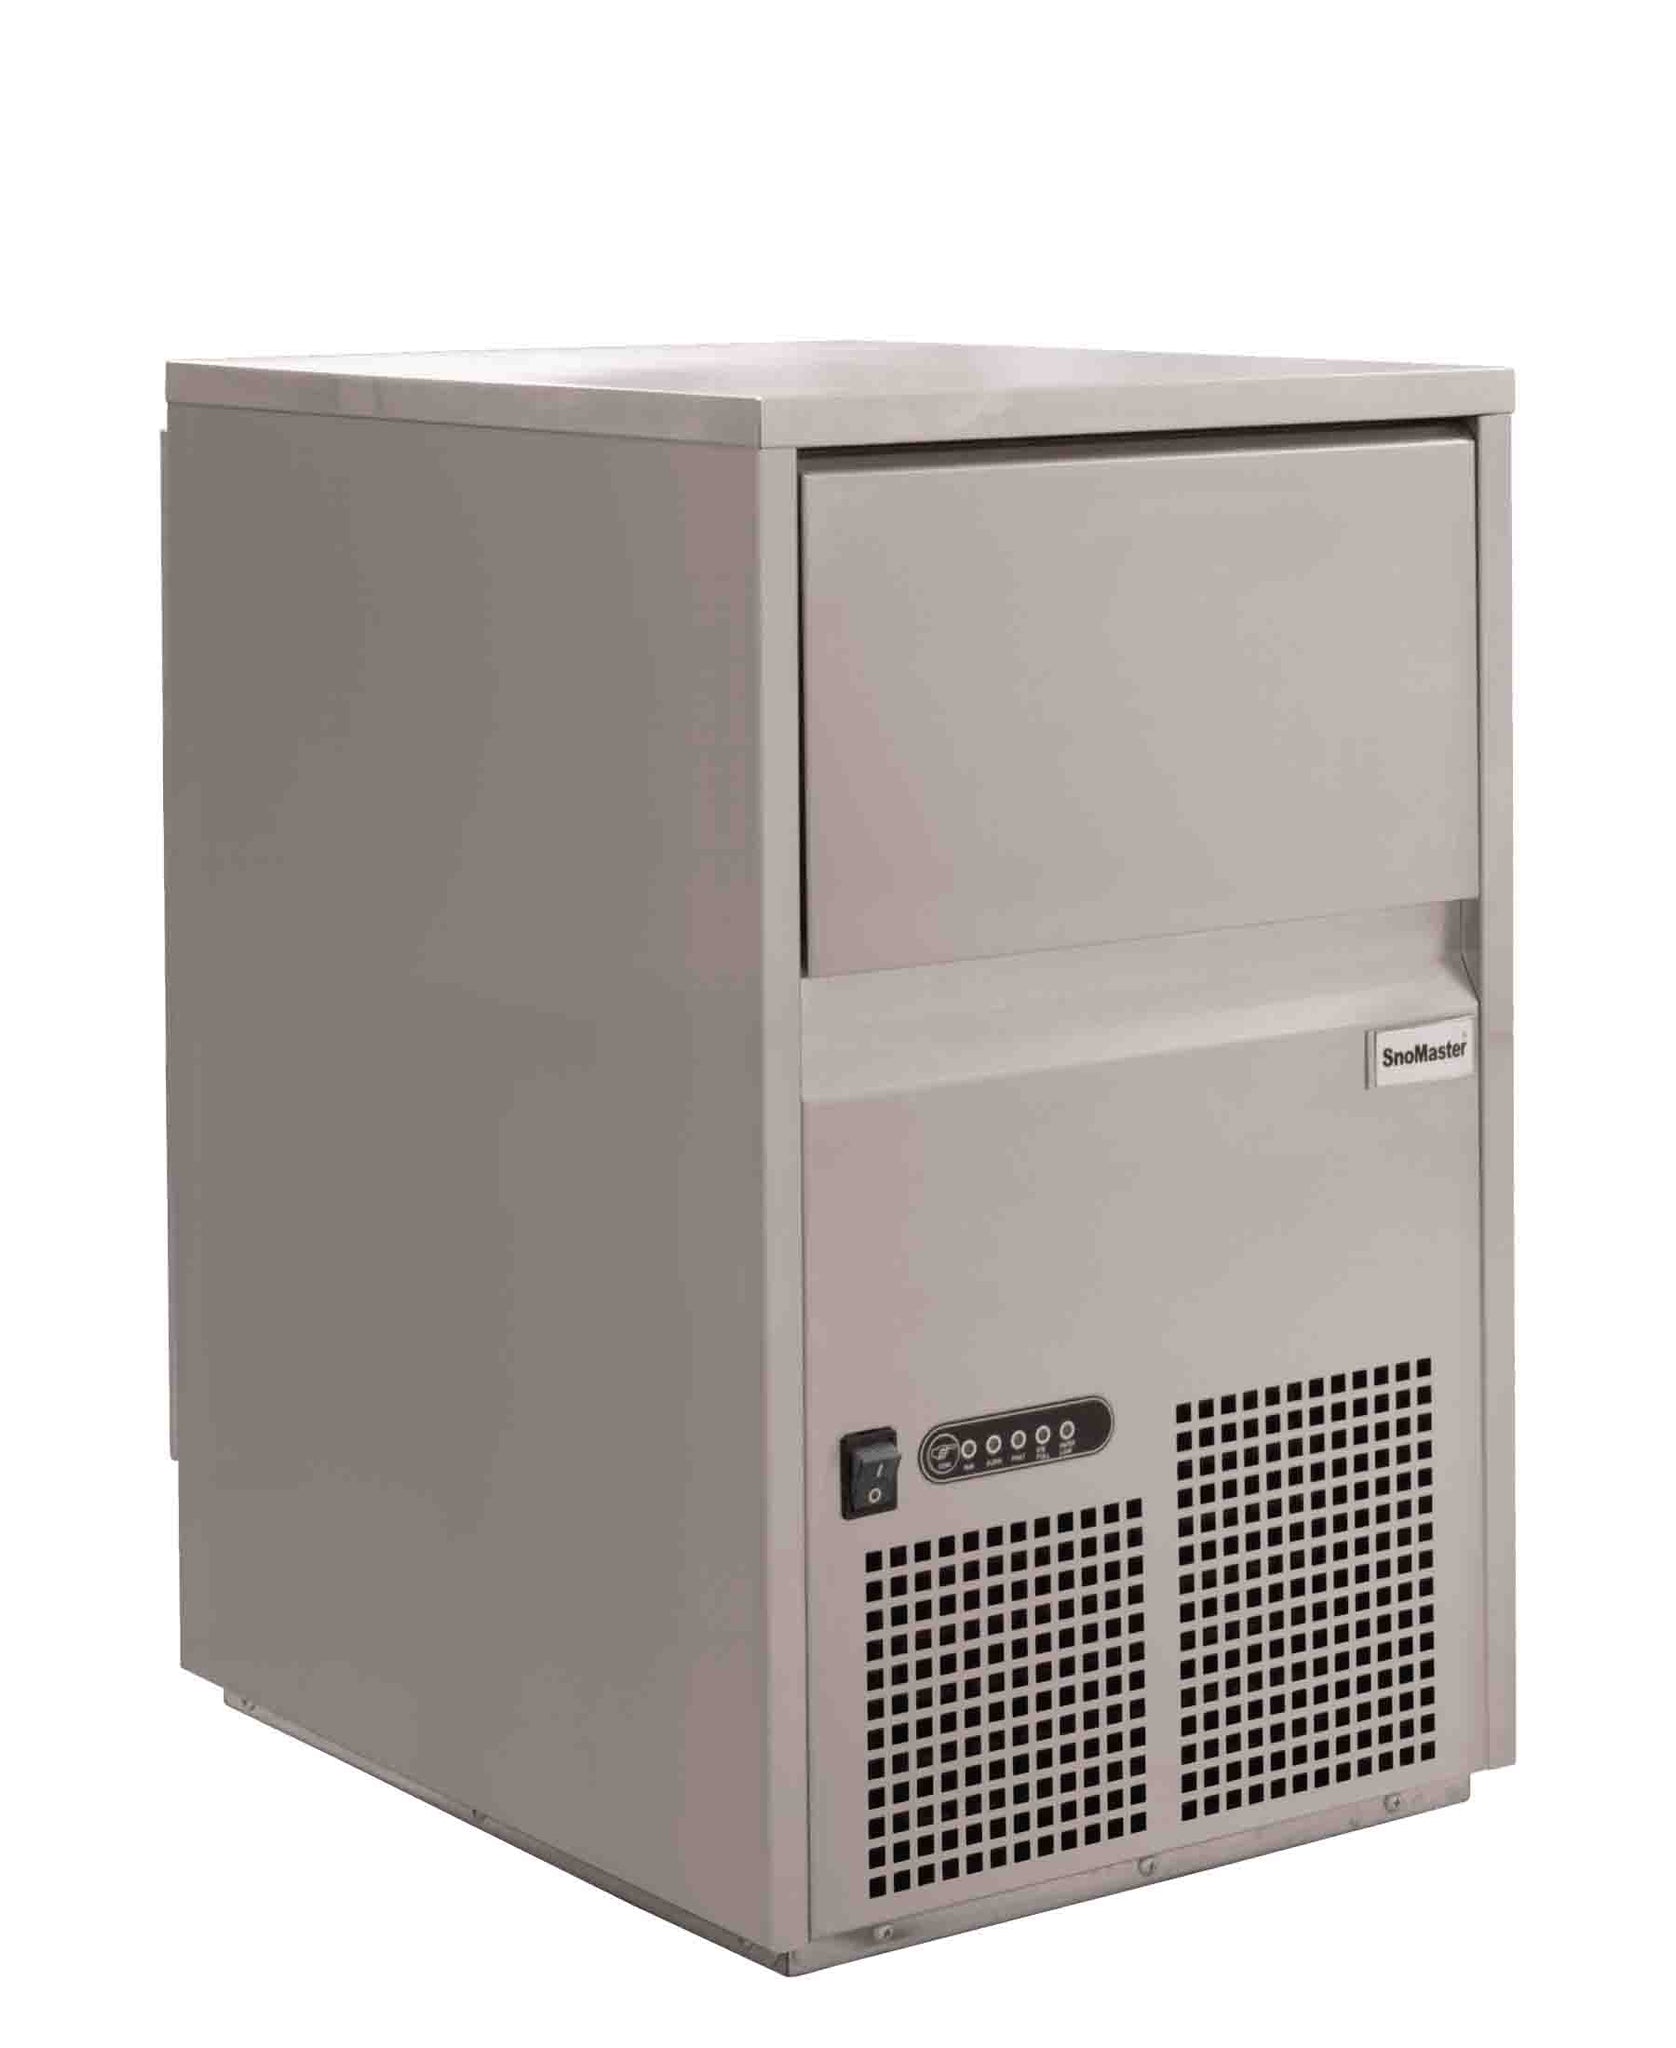 SnoMaster 26Kg Plumbed-In Ice Maker - Silver